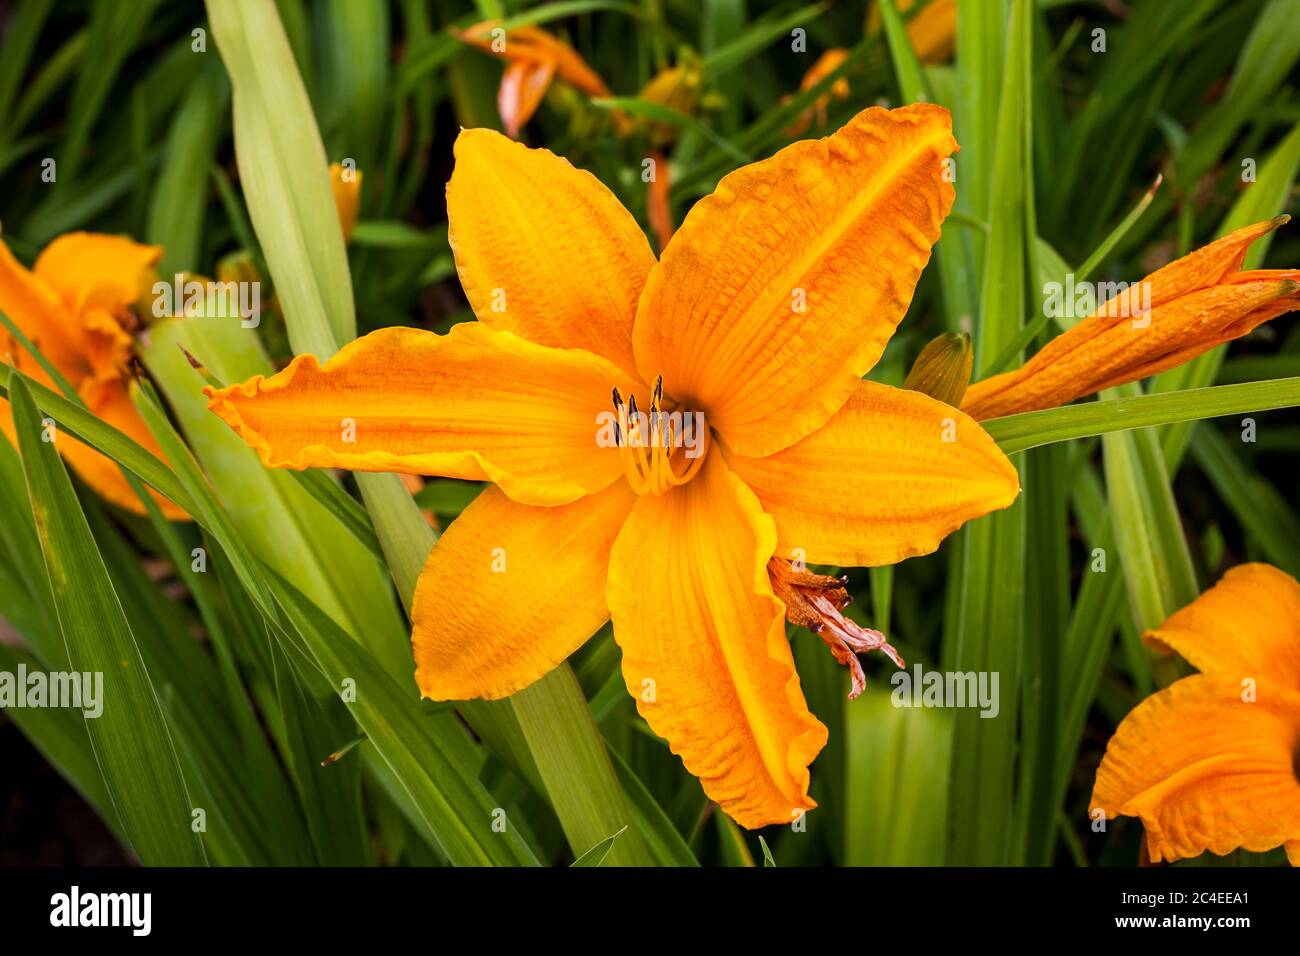 Hemerocallis 'Burning Daylight' a spring flowering plant commonly known as daylily Stock Photo